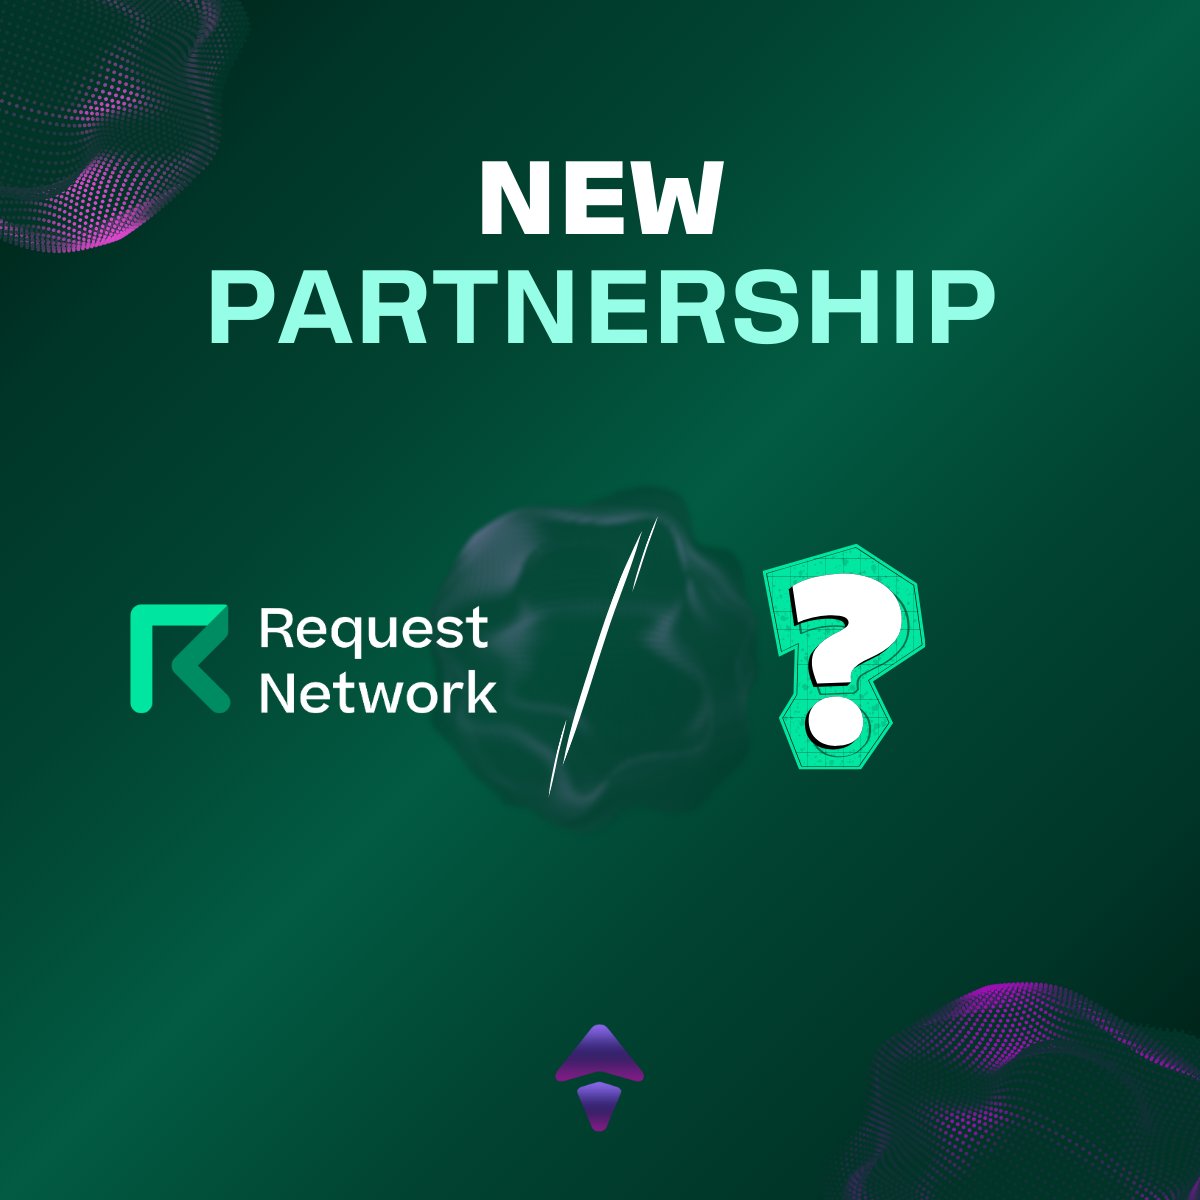 Request Network is looking for new partners to lend a helping hand to our growing ecosystem of builders 📗🤝

Join current partners @hackenclub @uptecporto @RareSkills_io @42KualaLumpur by filling out this form: form.typeform.com/to/nbKSuJGK